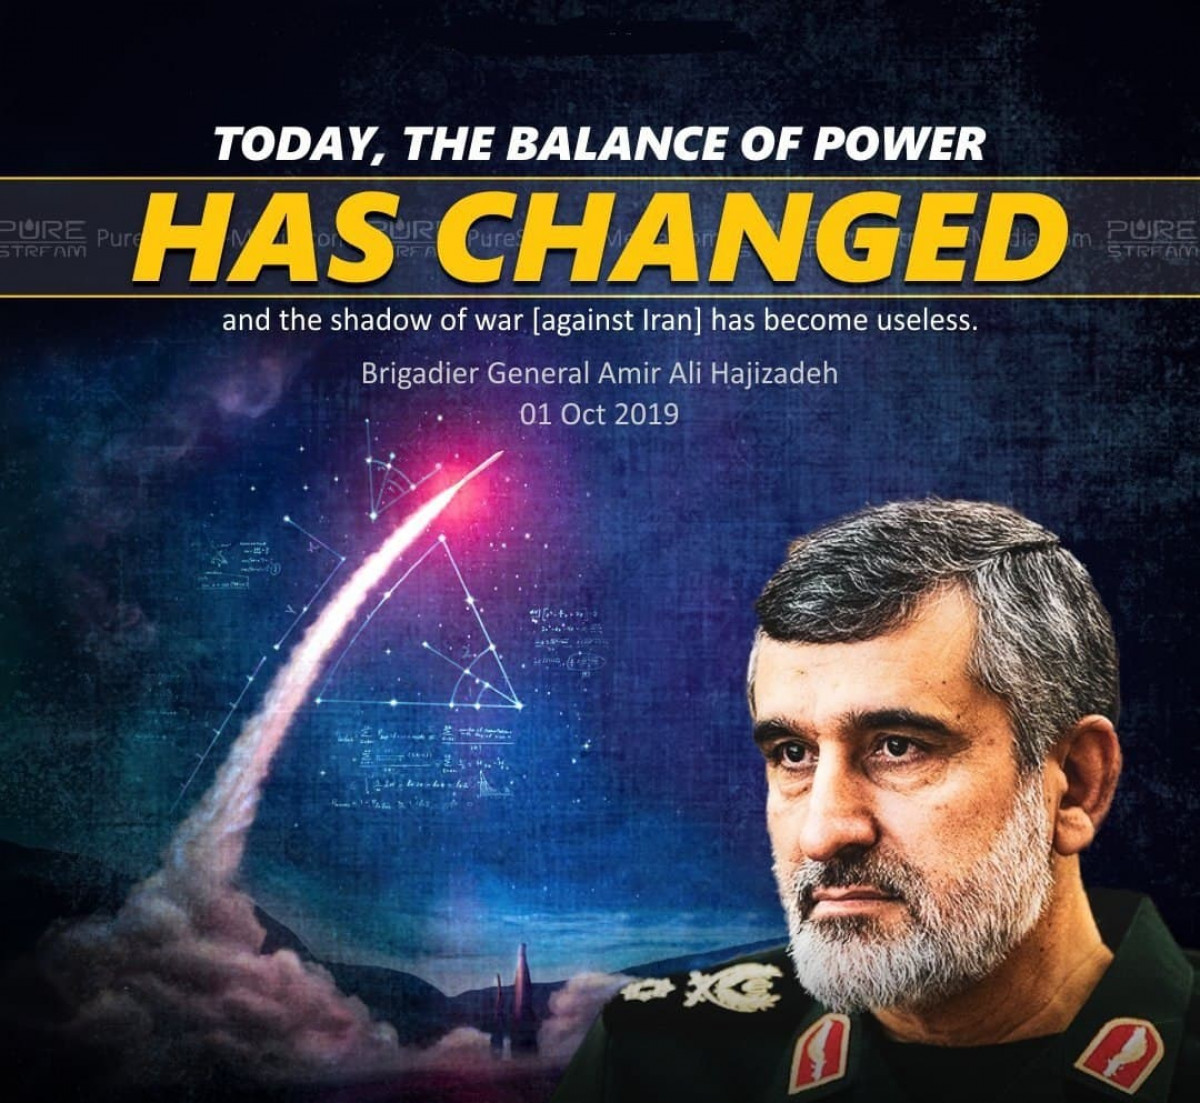 Today the balance of power HAS CHANGED and the shadow of war [against Iran] has become useless